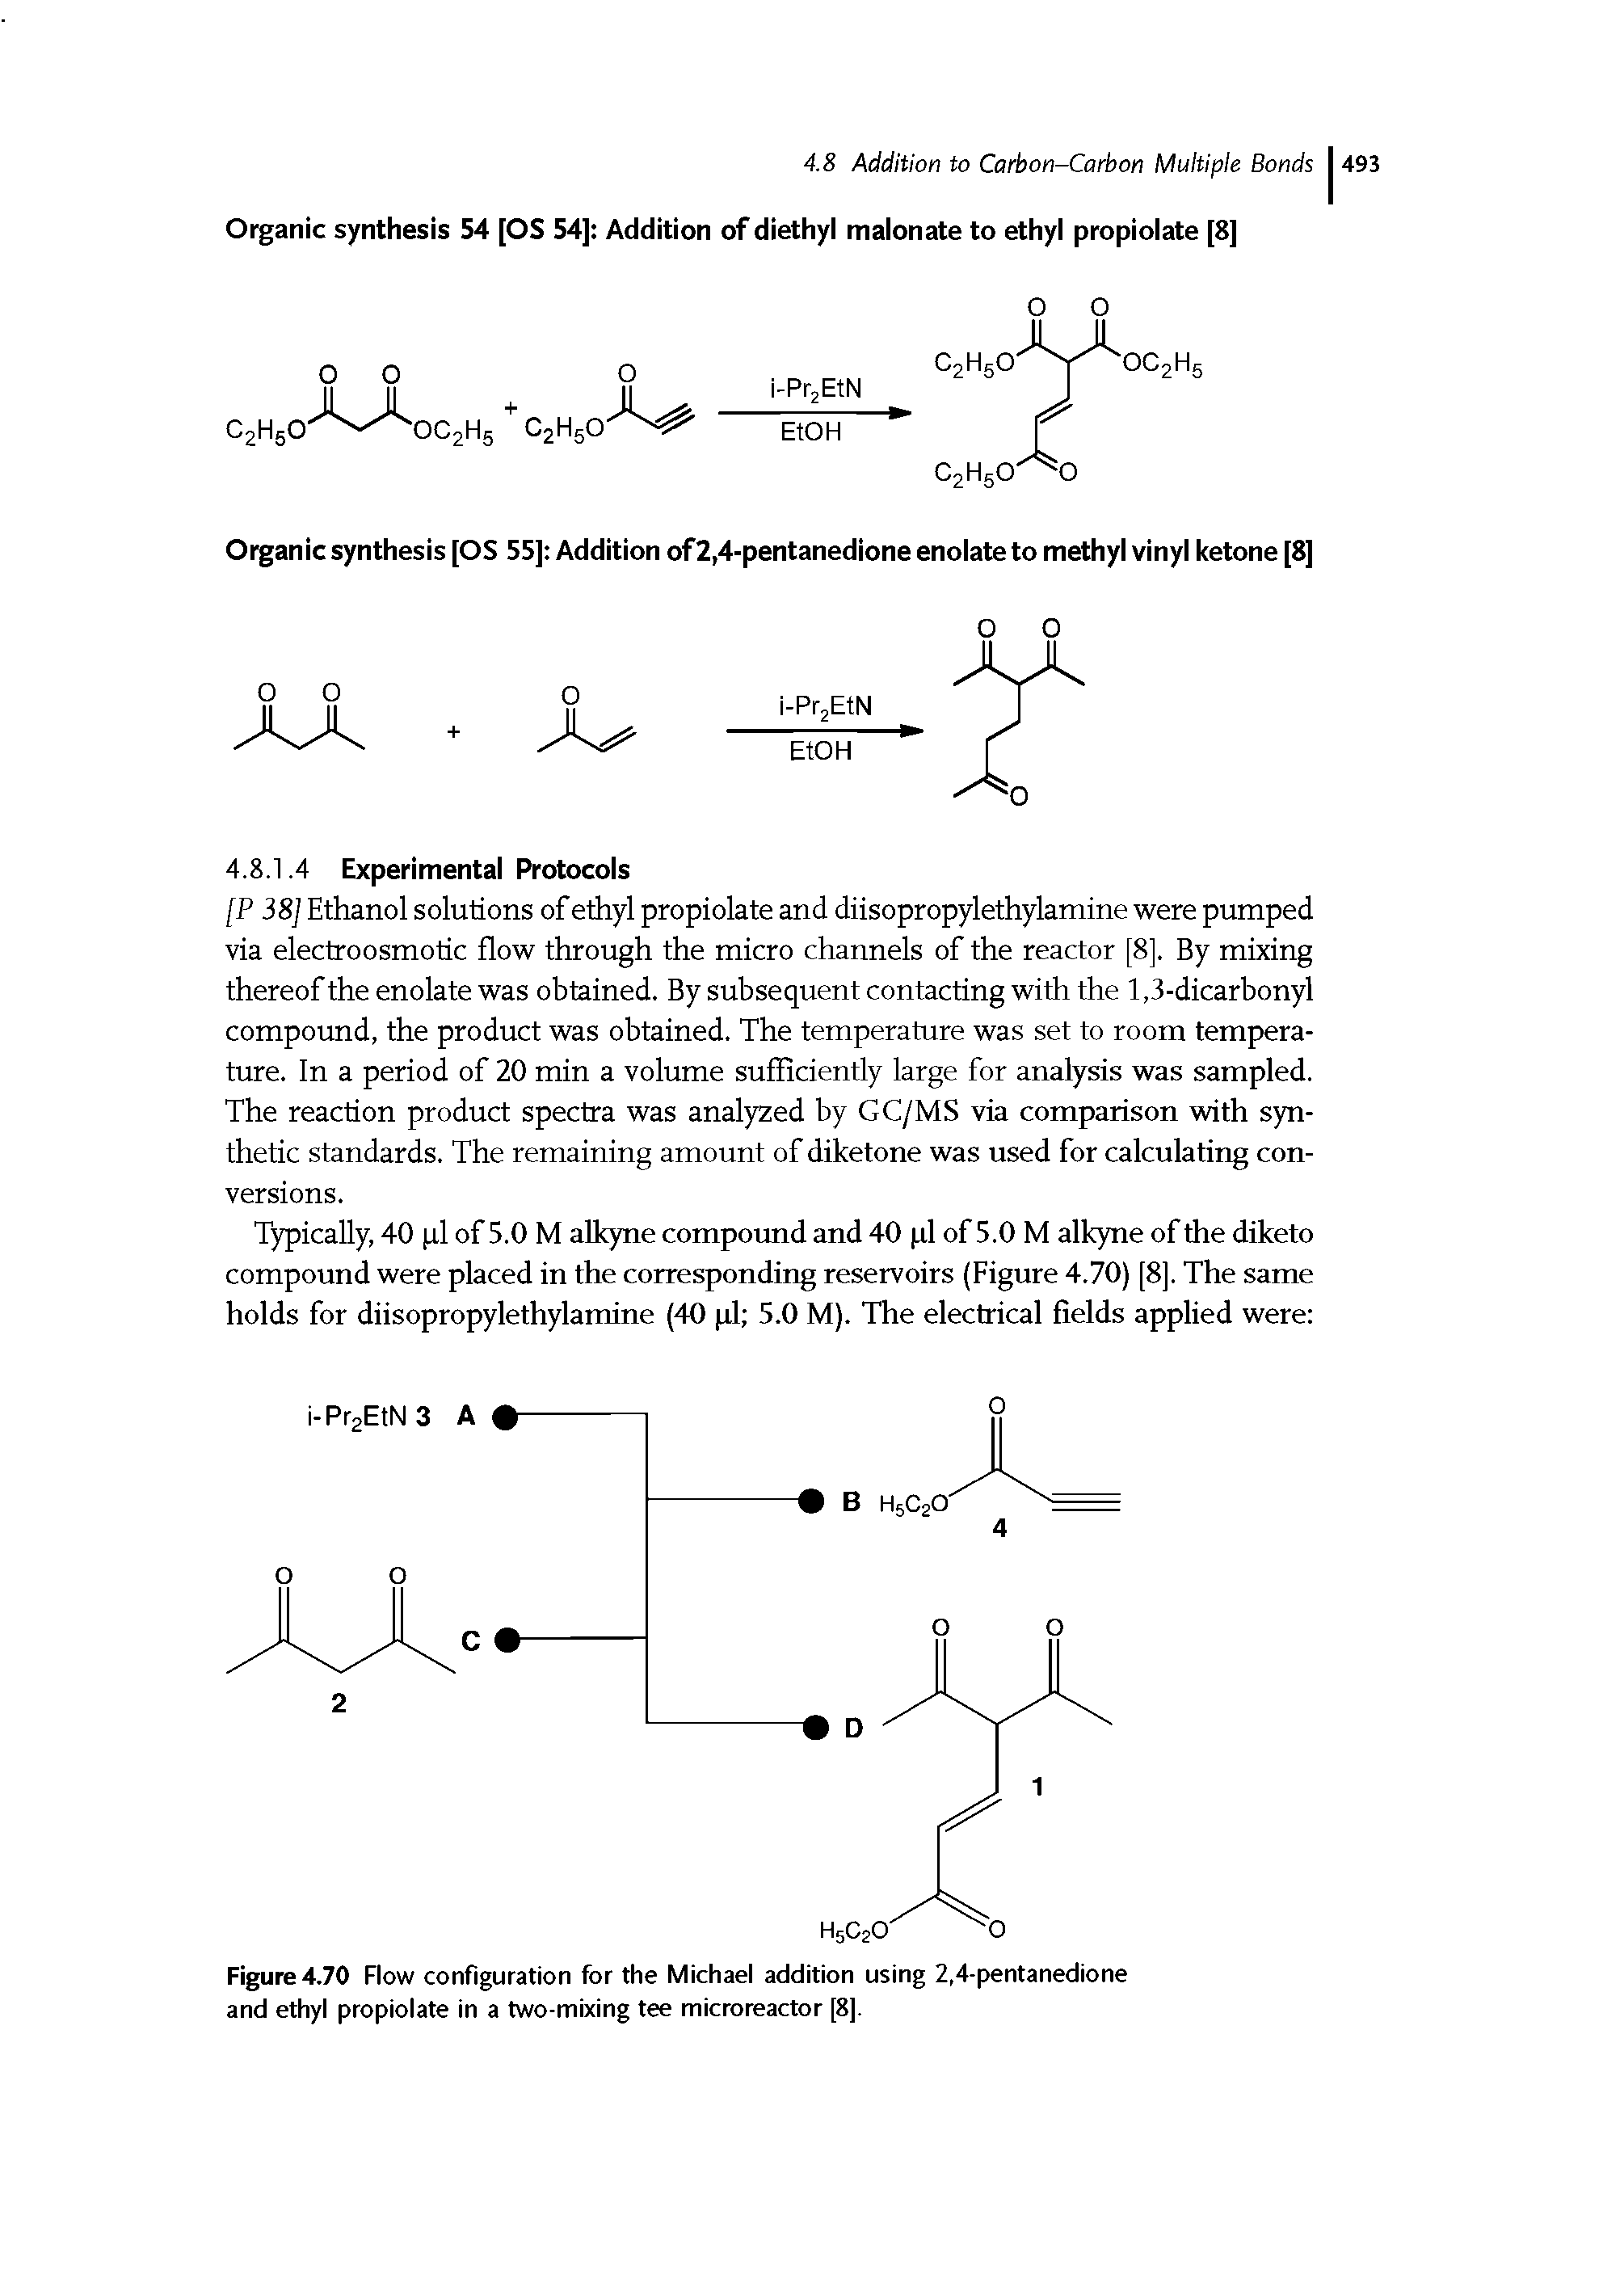 Figure 4.70 Flow configuration for the Michael addition using 2,4-pentanedione and ethyl propiolate in a two-mixing tee microreactor [8].